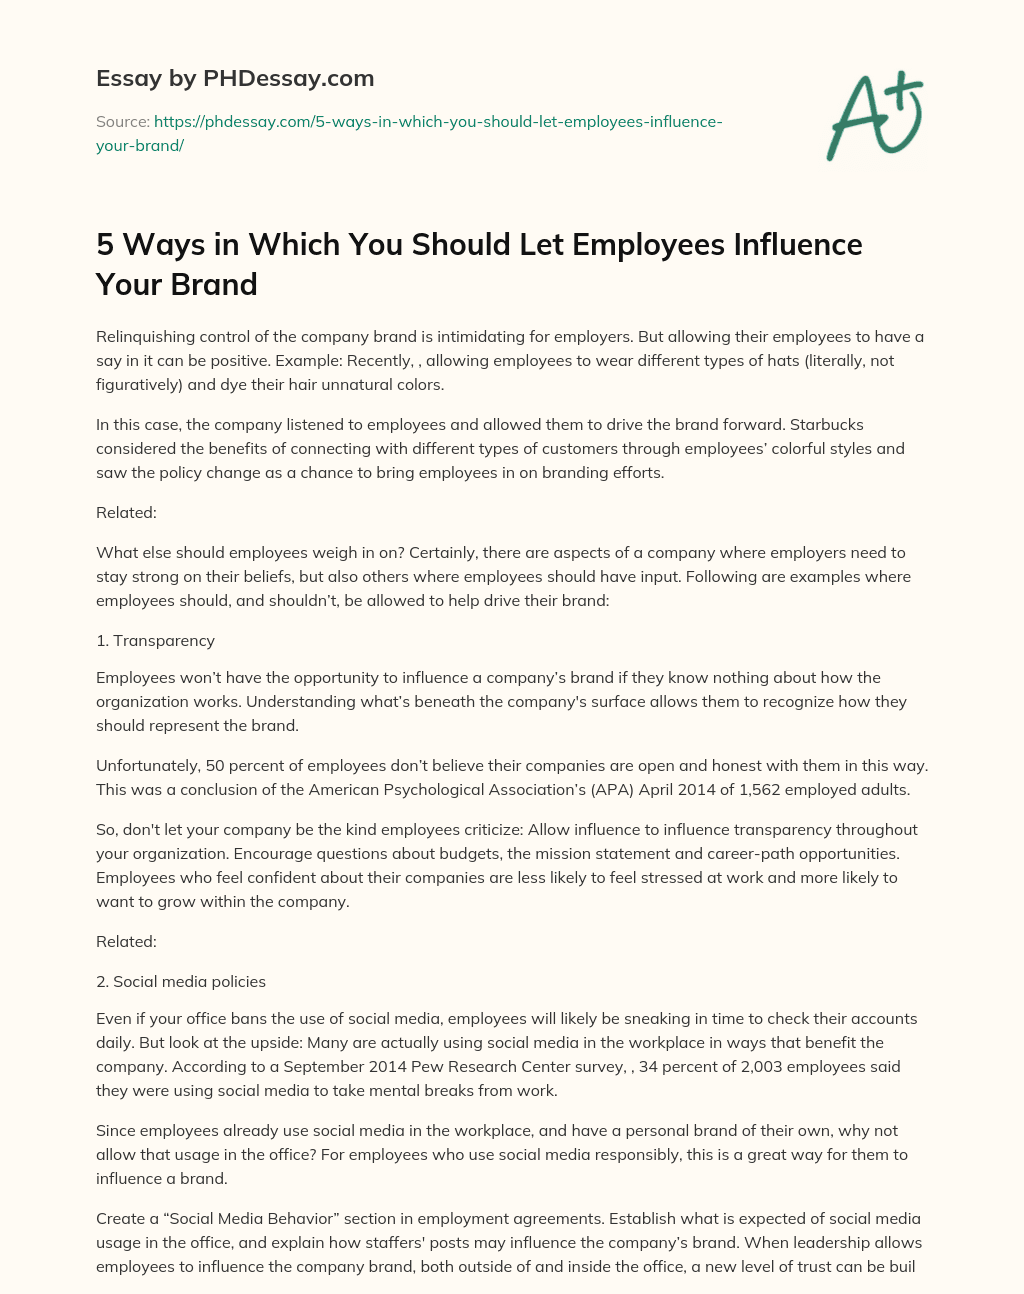 5 Ways in Which You Should Let Employees Influence Your Brand essay